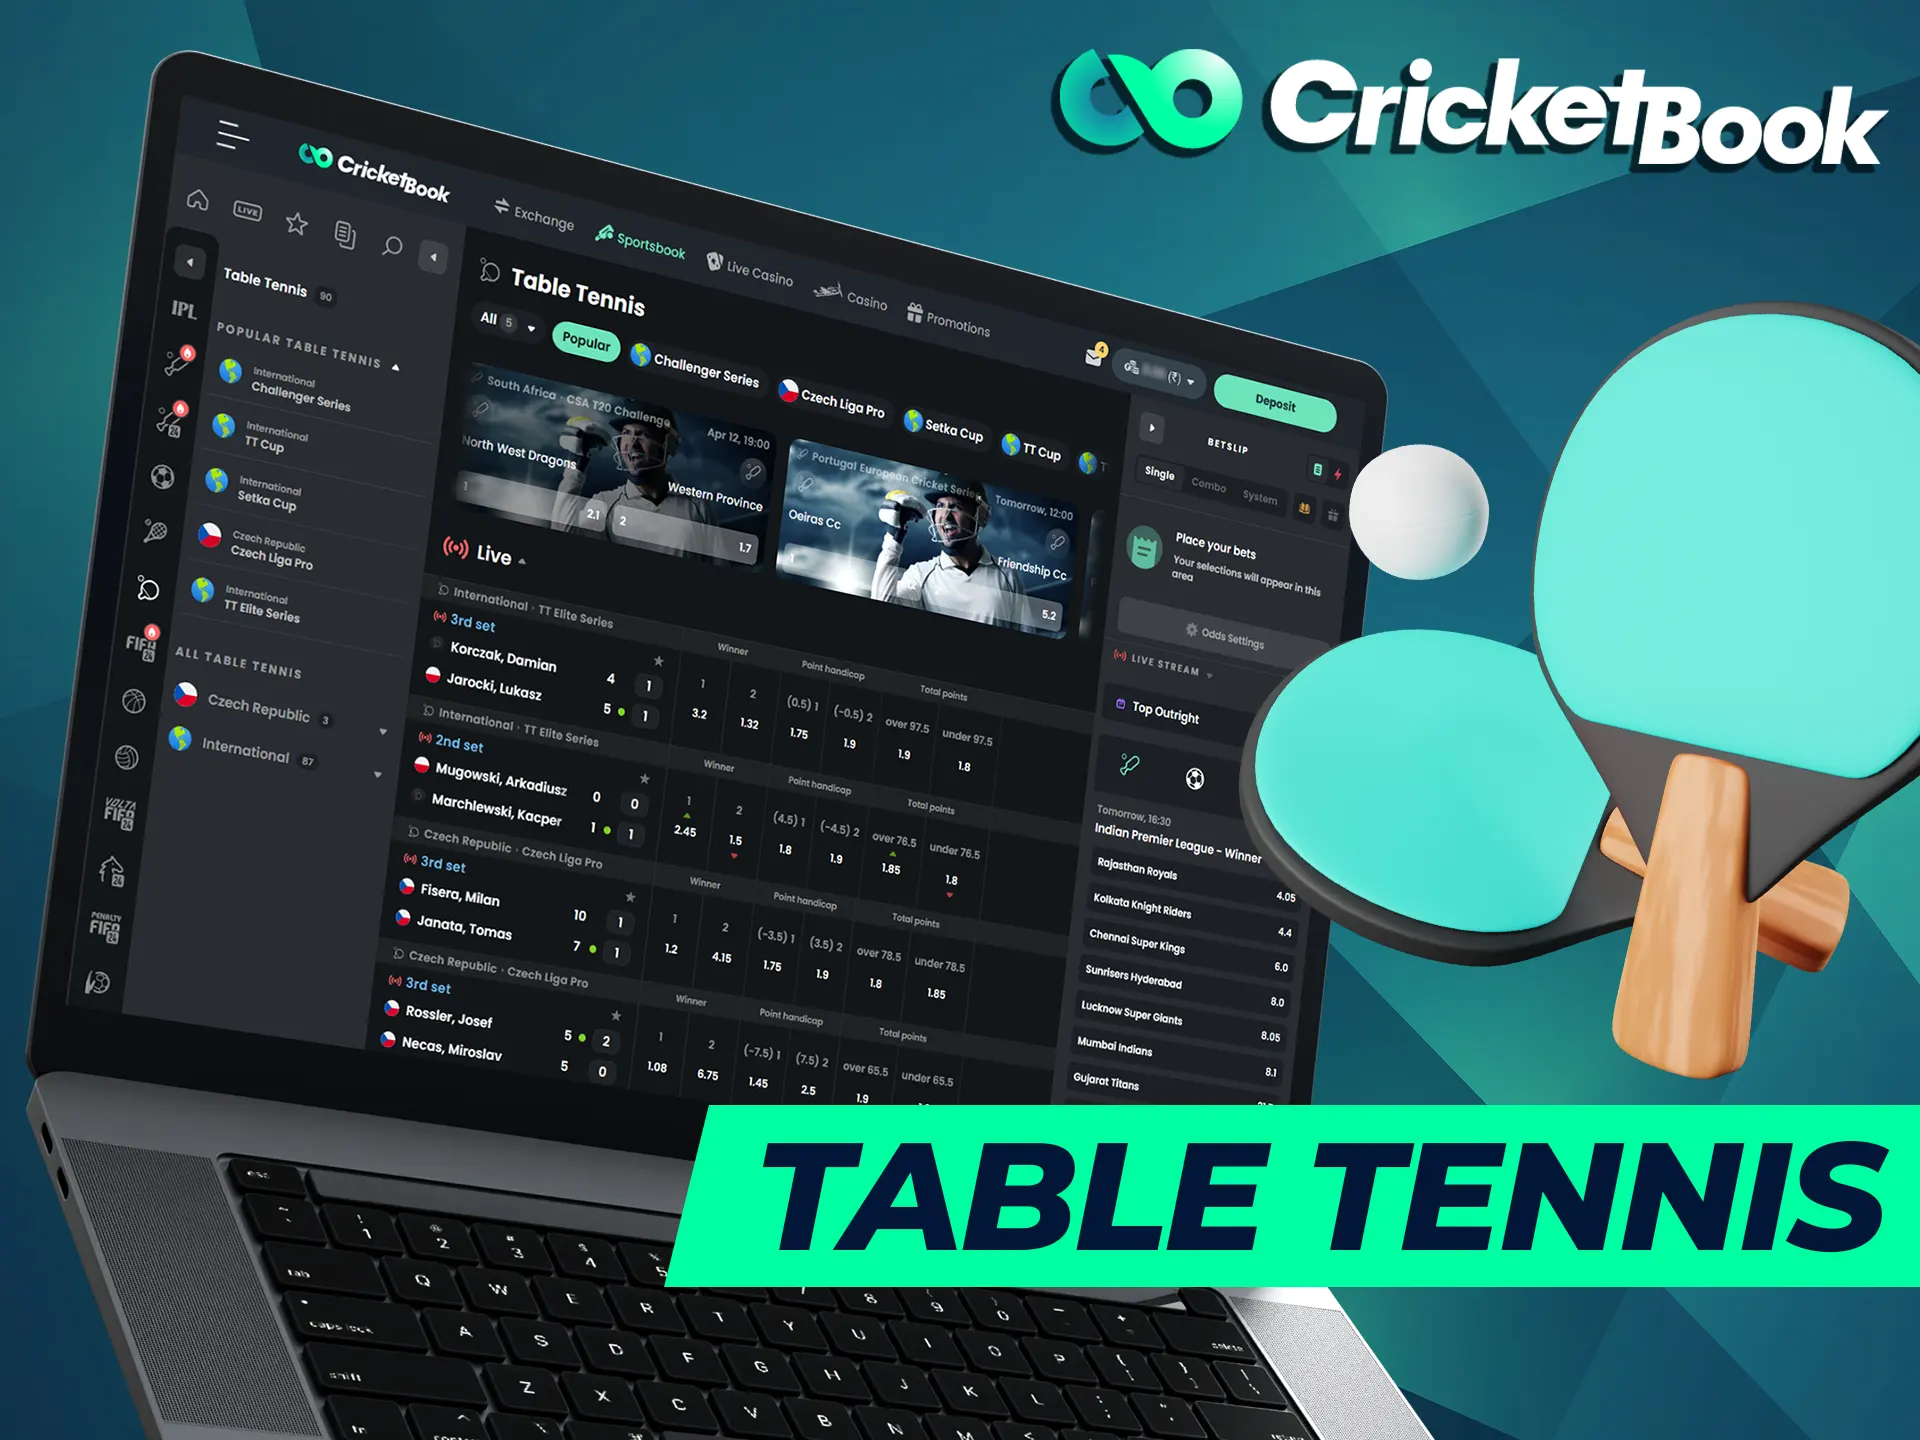 Place your table tennis bets on the CricketBook website.